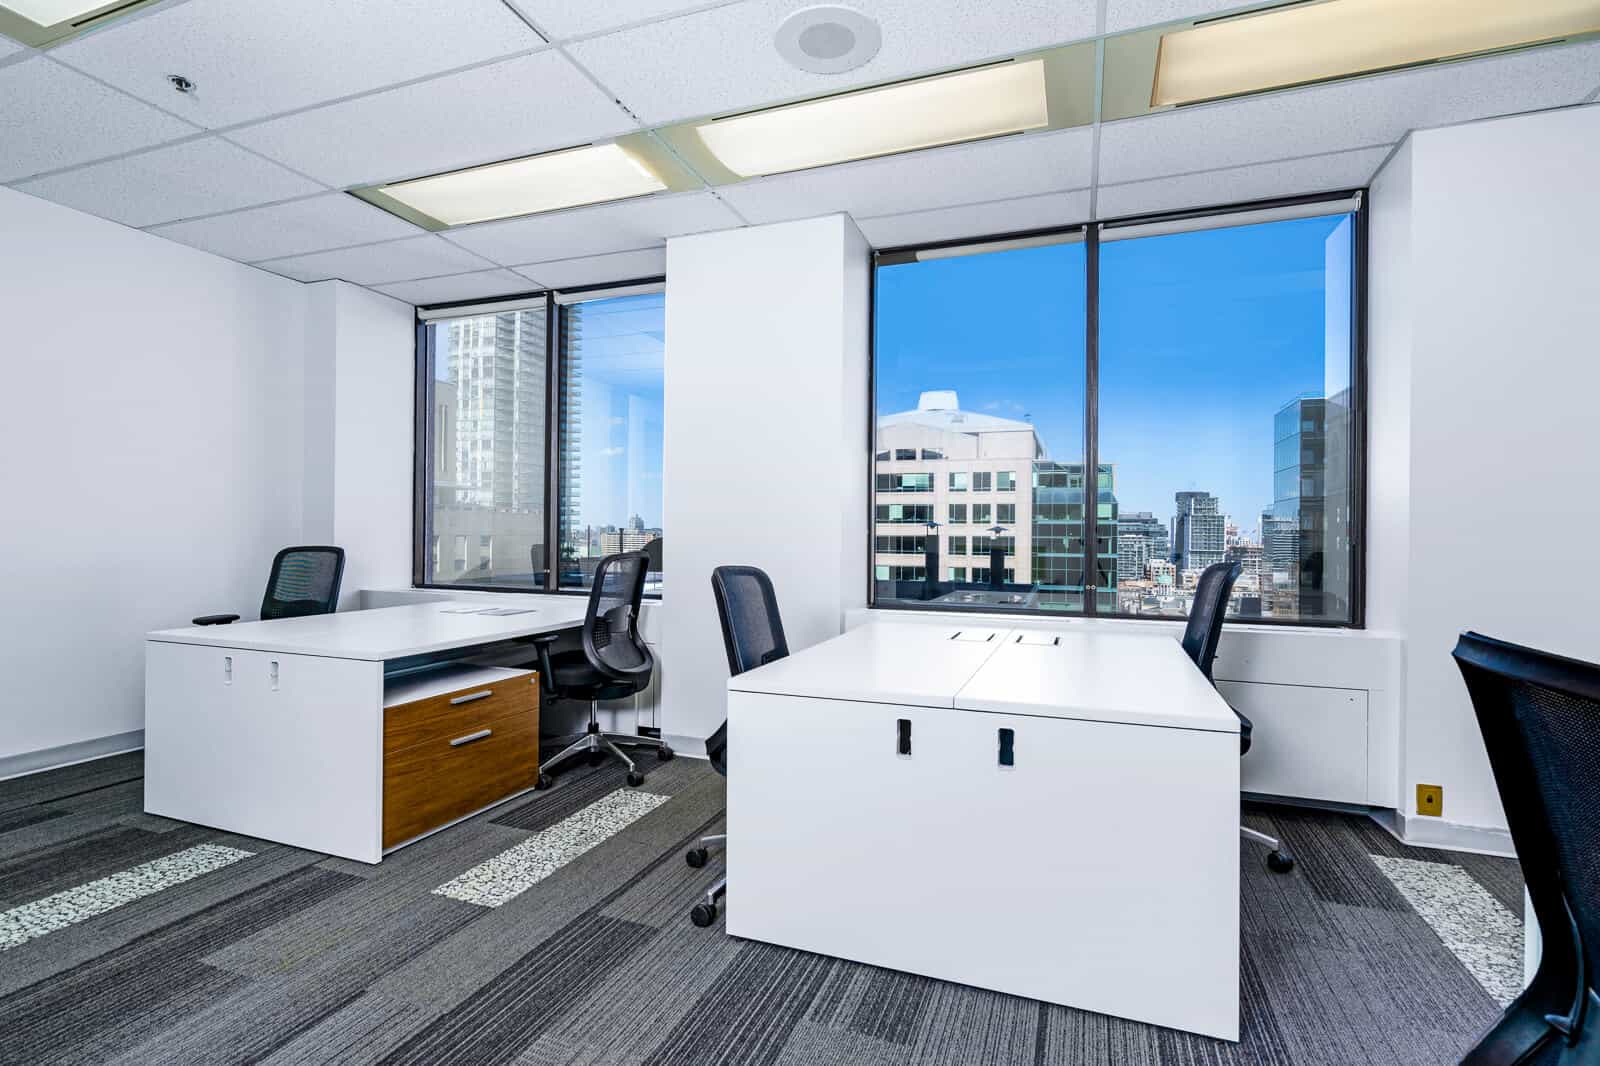 Private Office Spaces Toronto Rentals - Telsec Business Centres